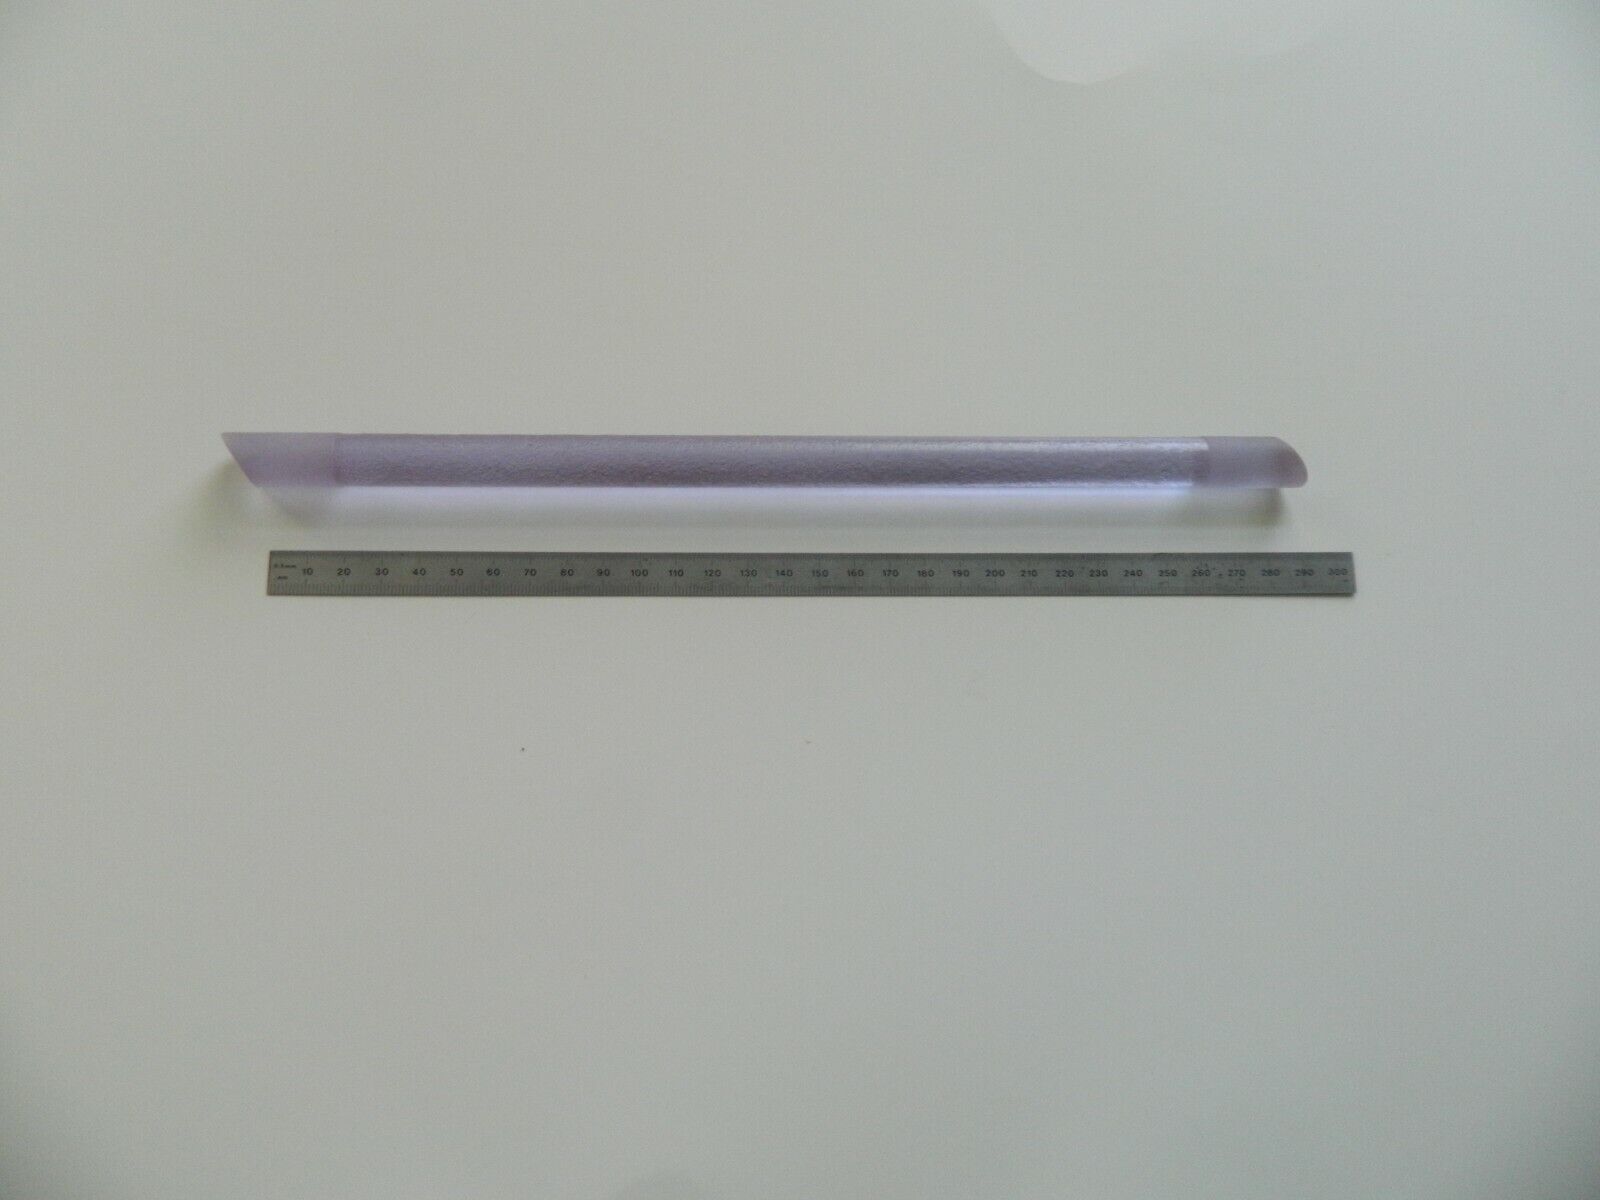 Silicate Nd:glass rod, 14.5mm dia. x 280mm length, Brewster ends, new, vintage  